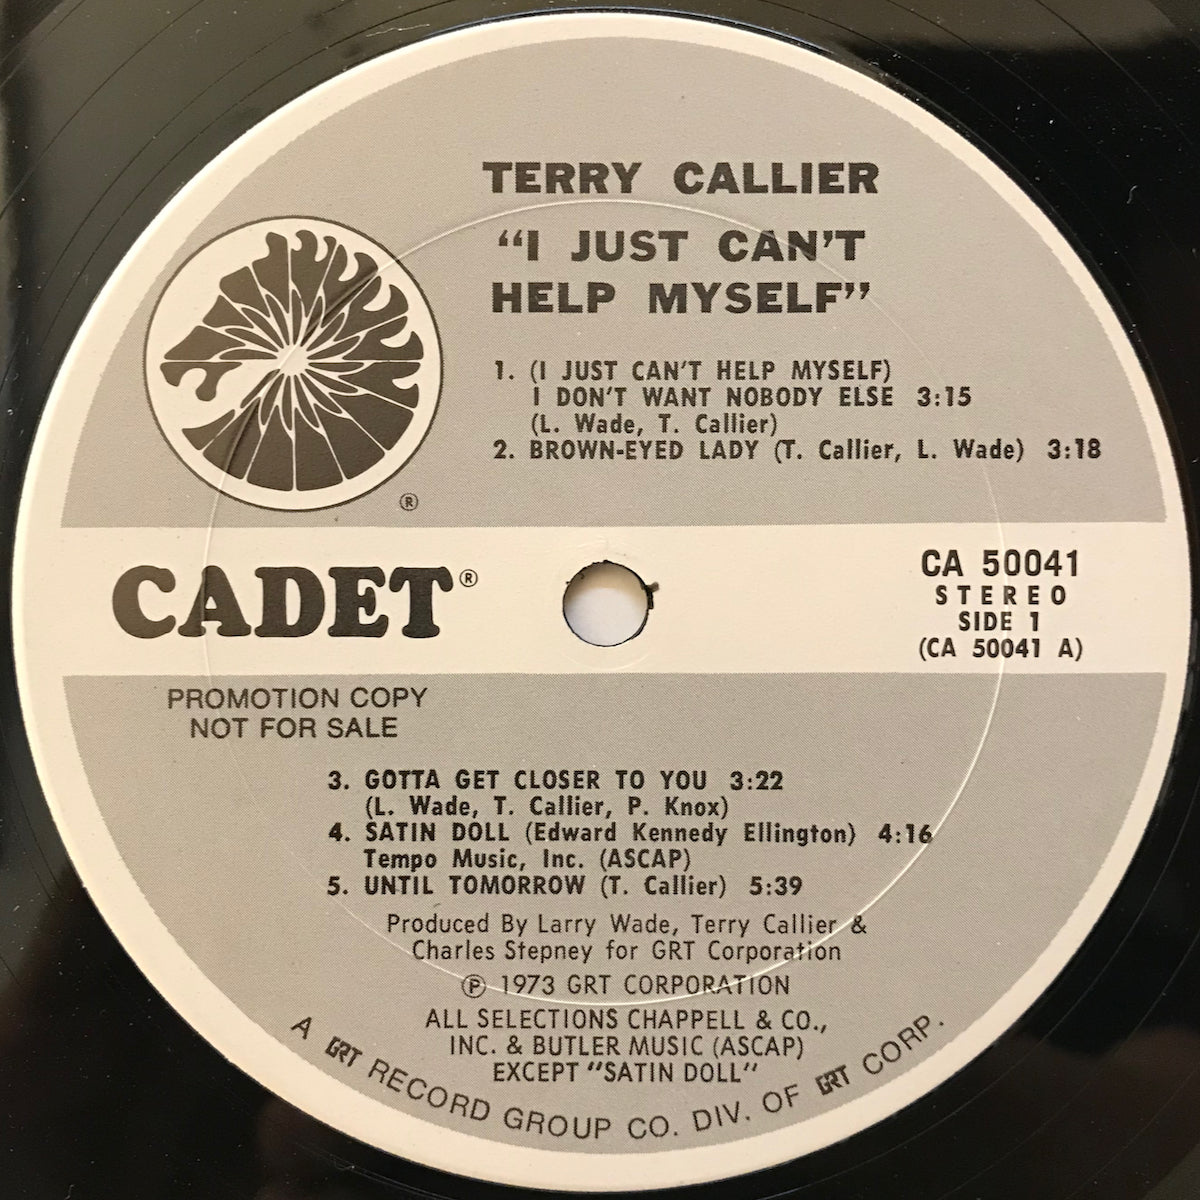 TERRY CALLIER I just can’t help myself